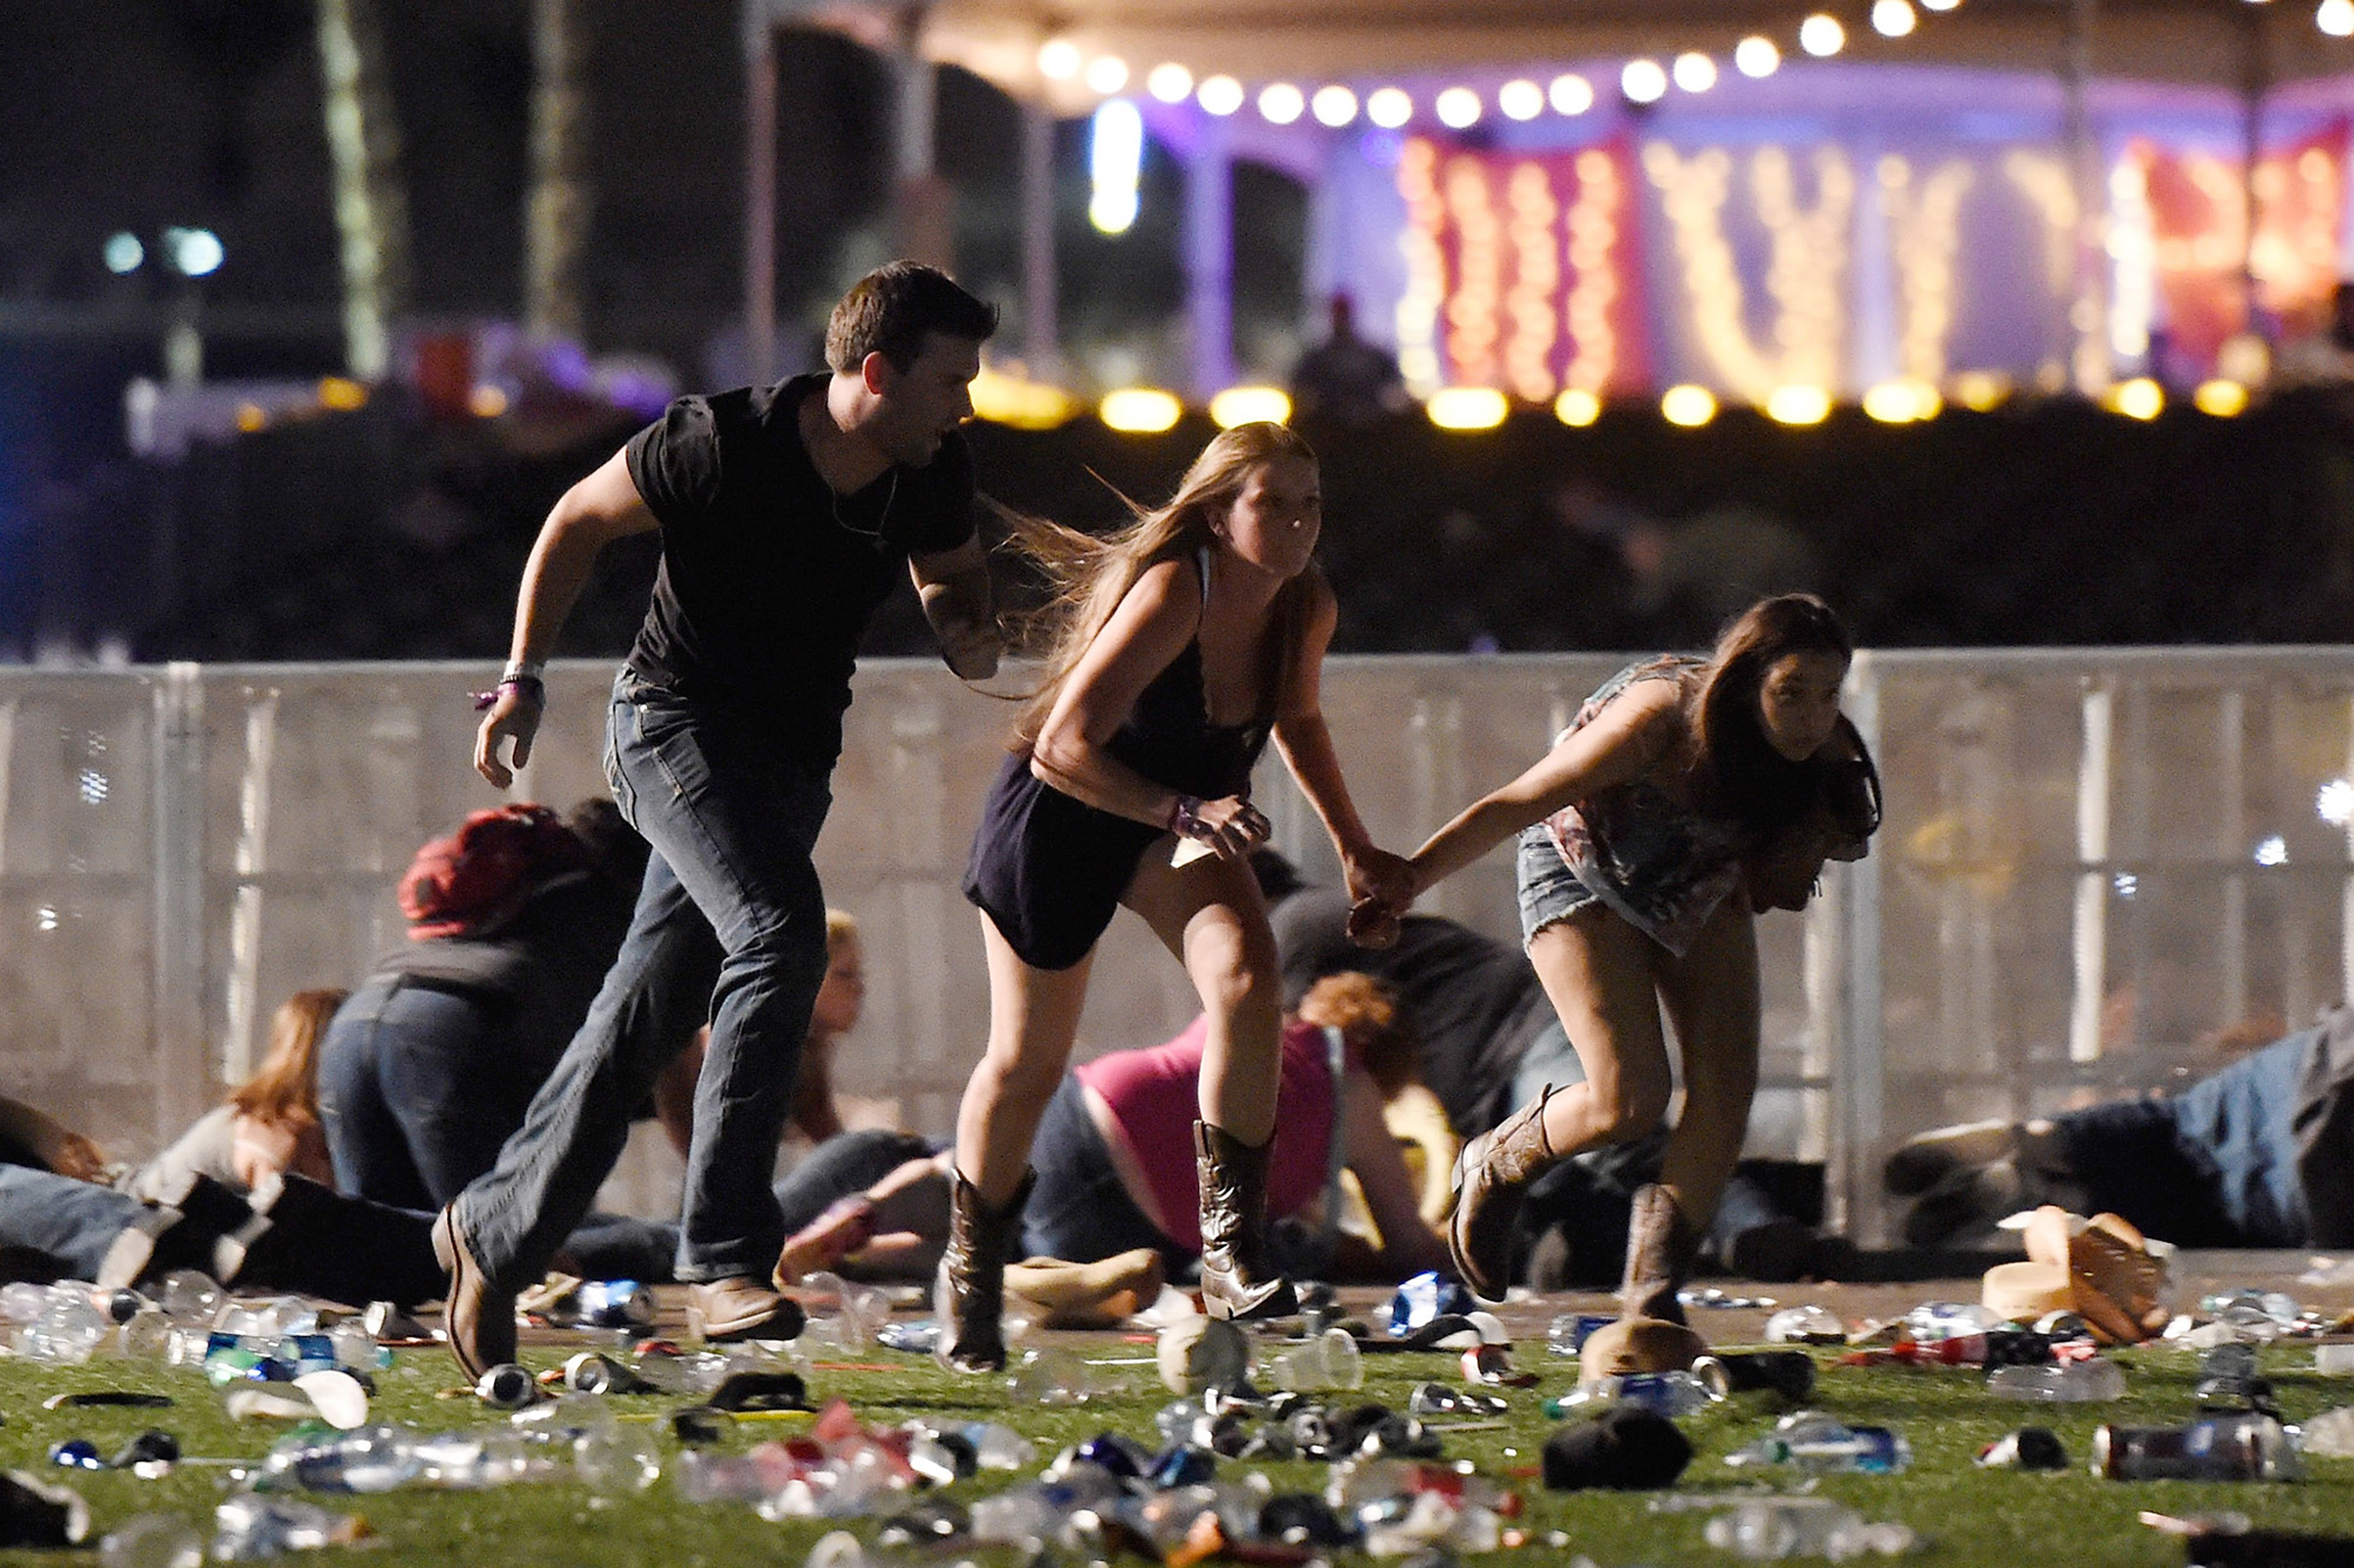 This GoFundMe Page Has Already Raised More Than $700,000 for Victims of the Las Vegas Shooting